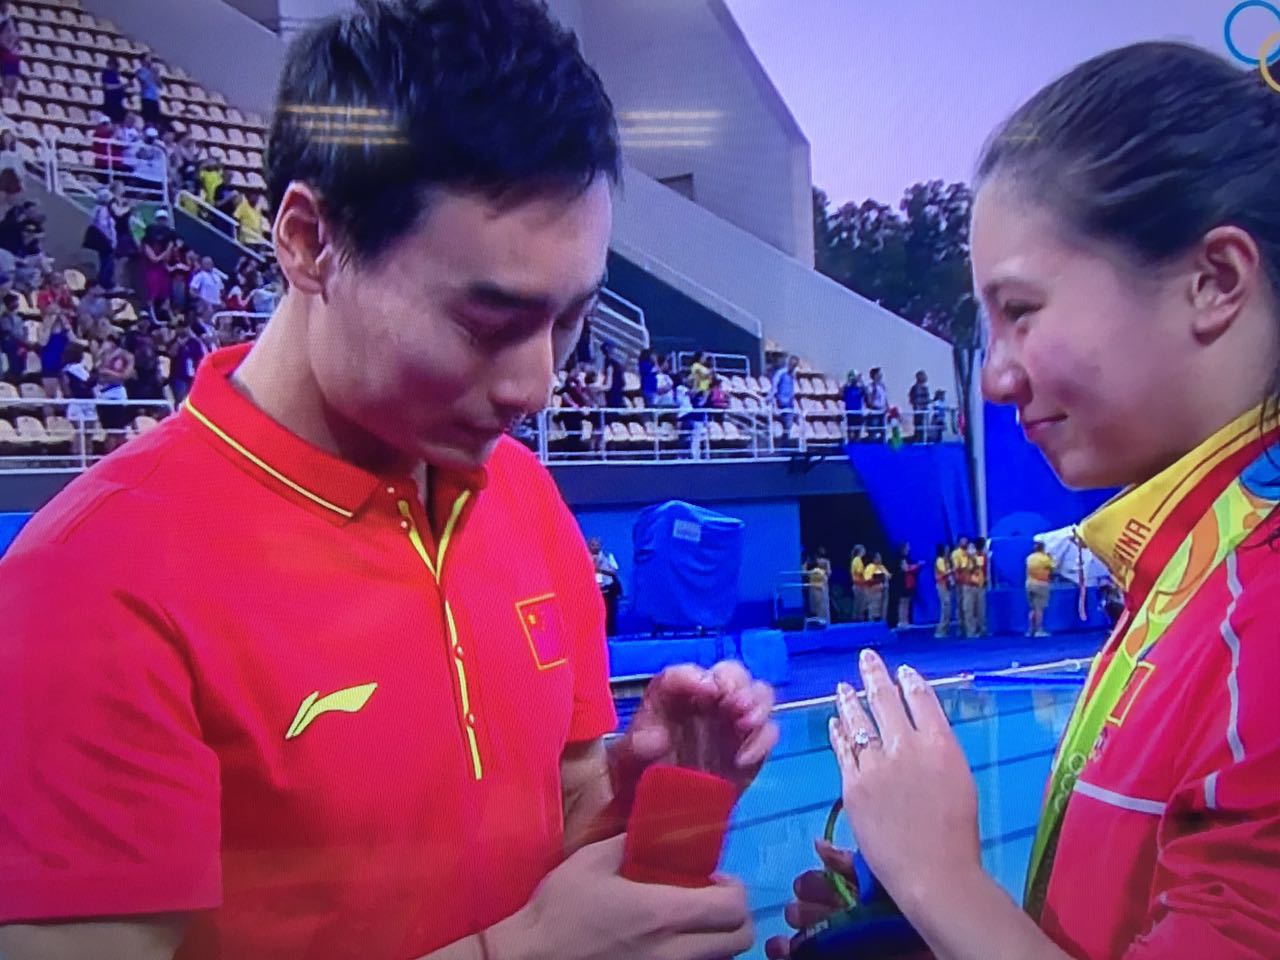 Chinese Diver Proposes to Teammate at Medal Ceremony